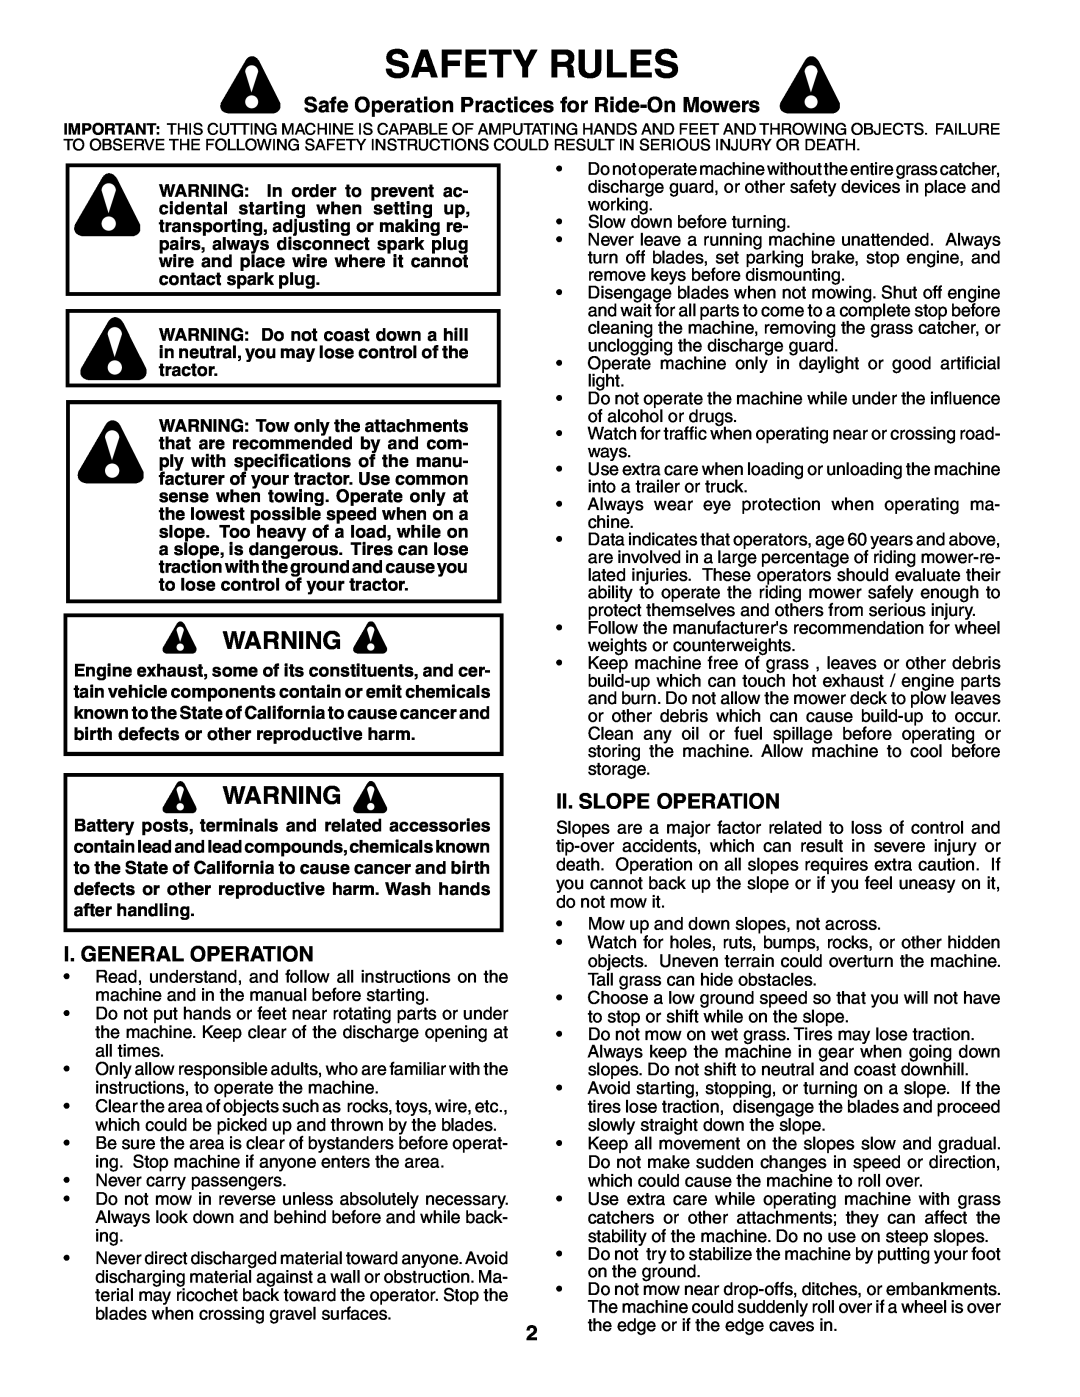 Poulan PD24PH48ST Safety Rules, Safe Operation Practices for Ride-On Mowers, I. General Operation, Ii. Slope Operation 